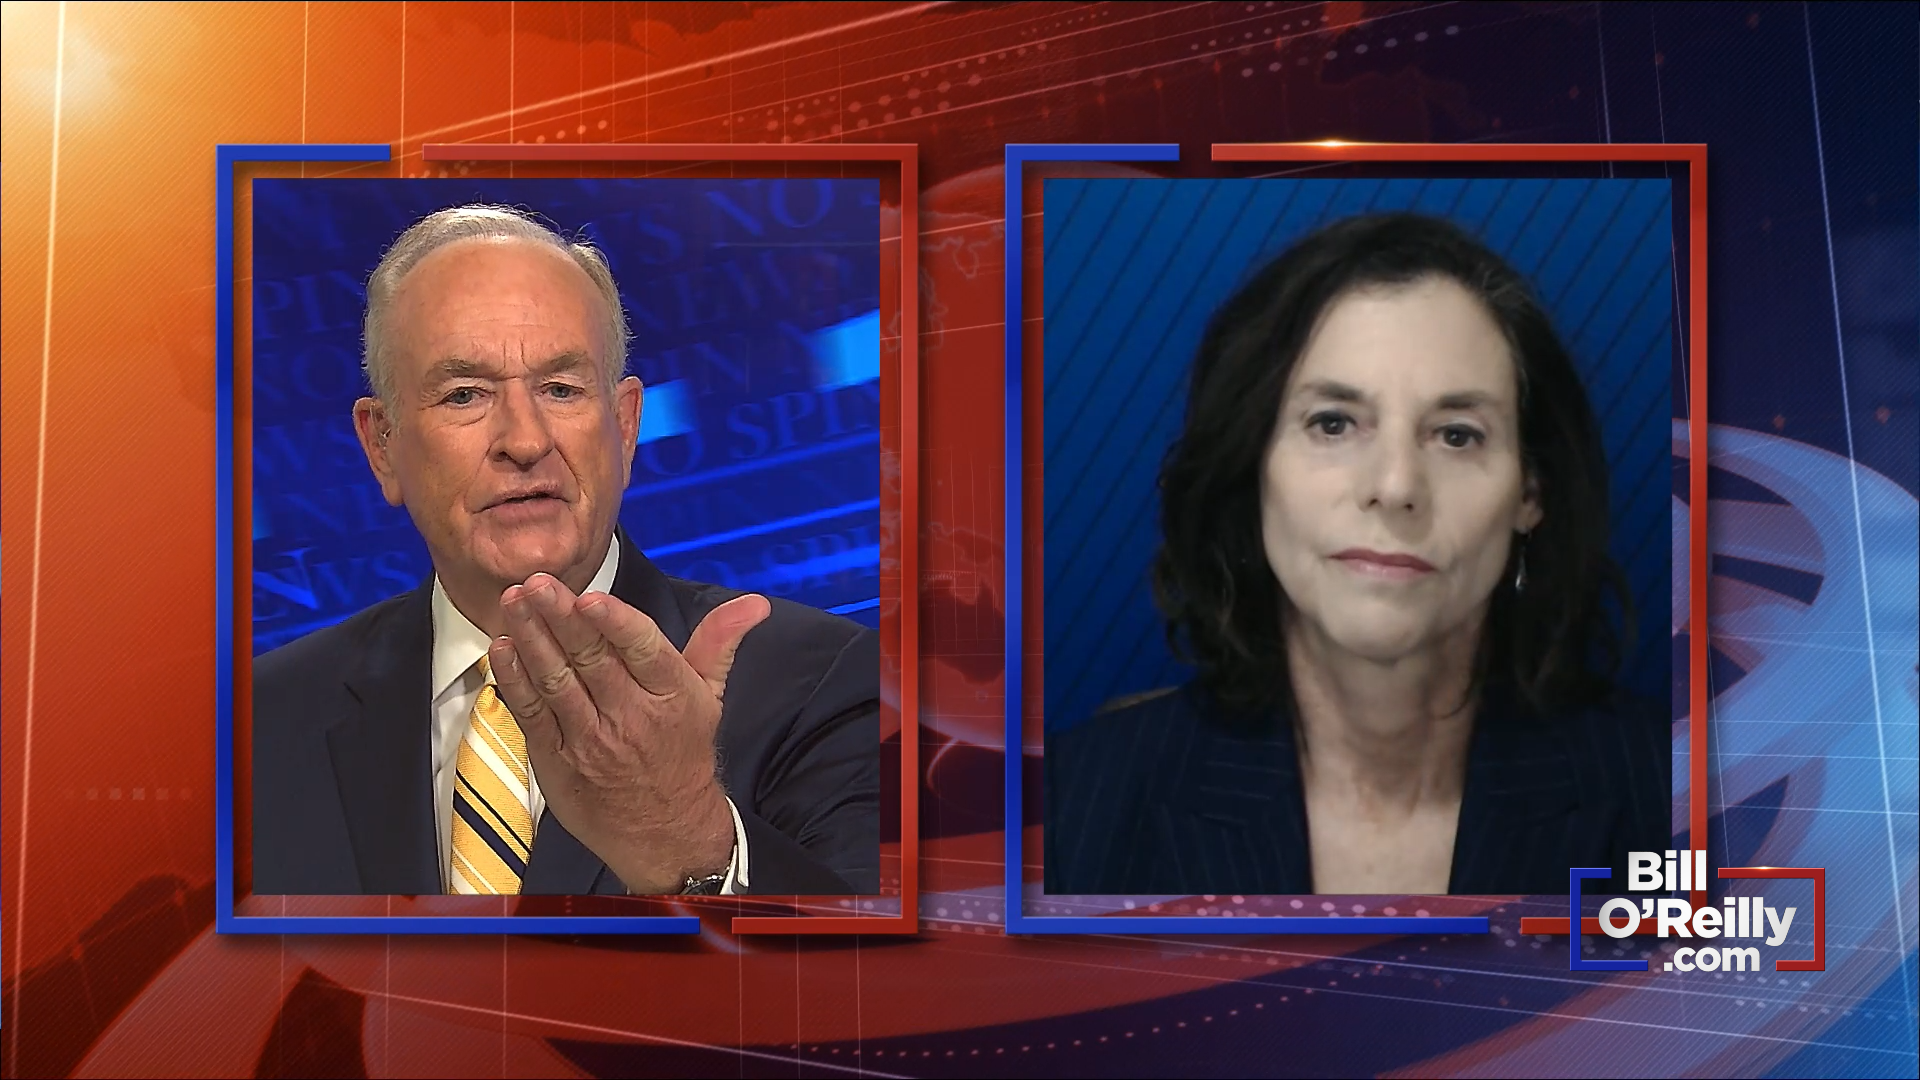 Listen: O'Reilly Discusses the Price of Fame with Washington Times' Cheryl Chumley